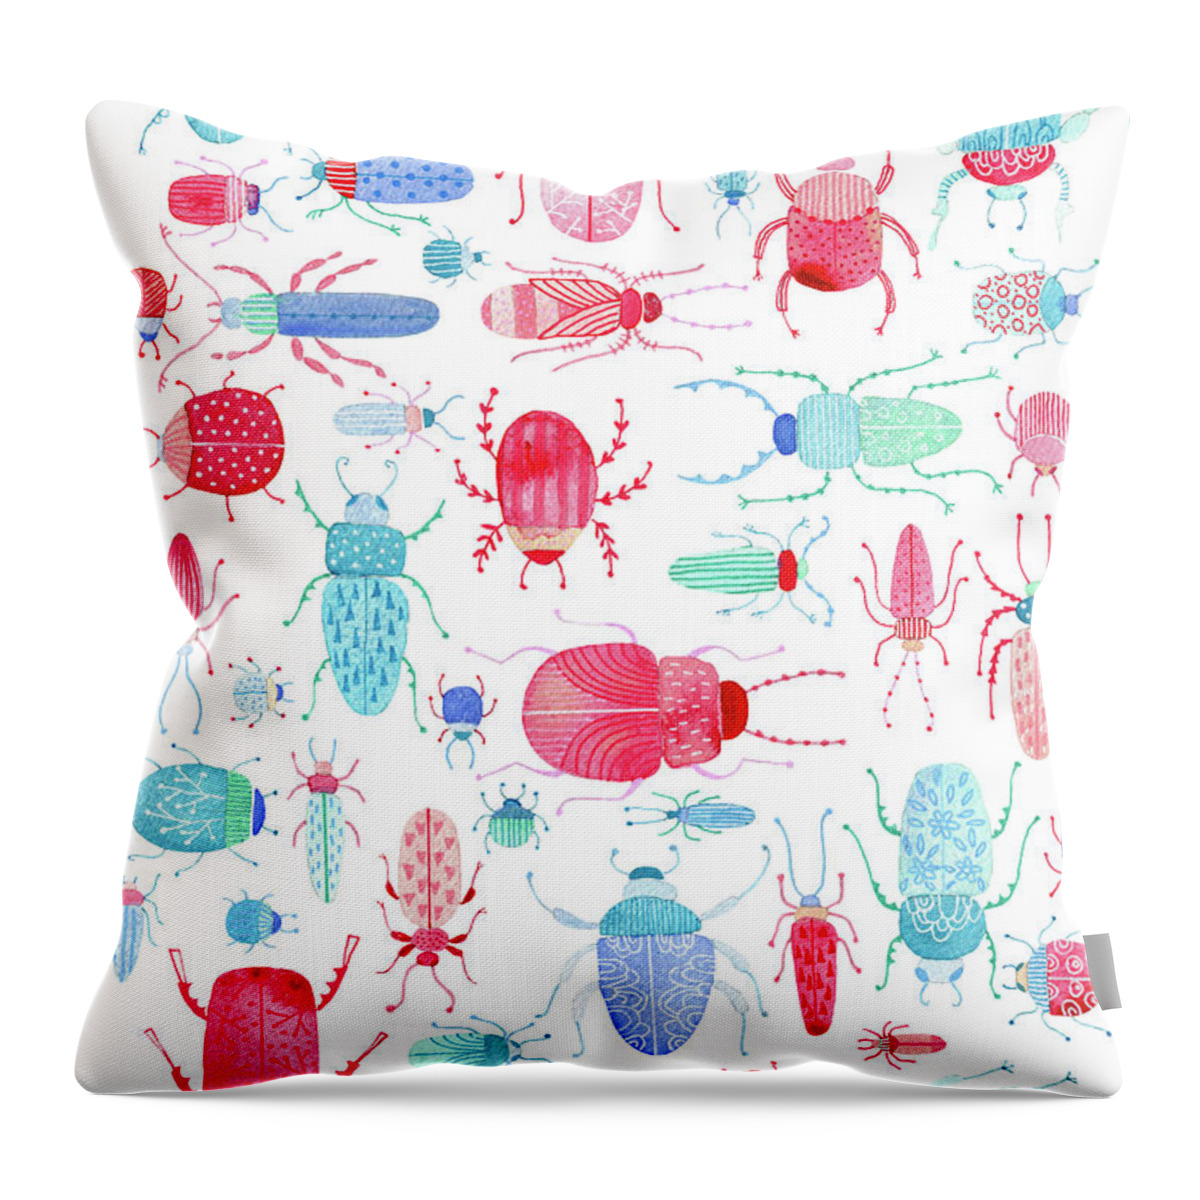  Beetle Throw Pillow featuring the painting Beetles by Nic Squirrell